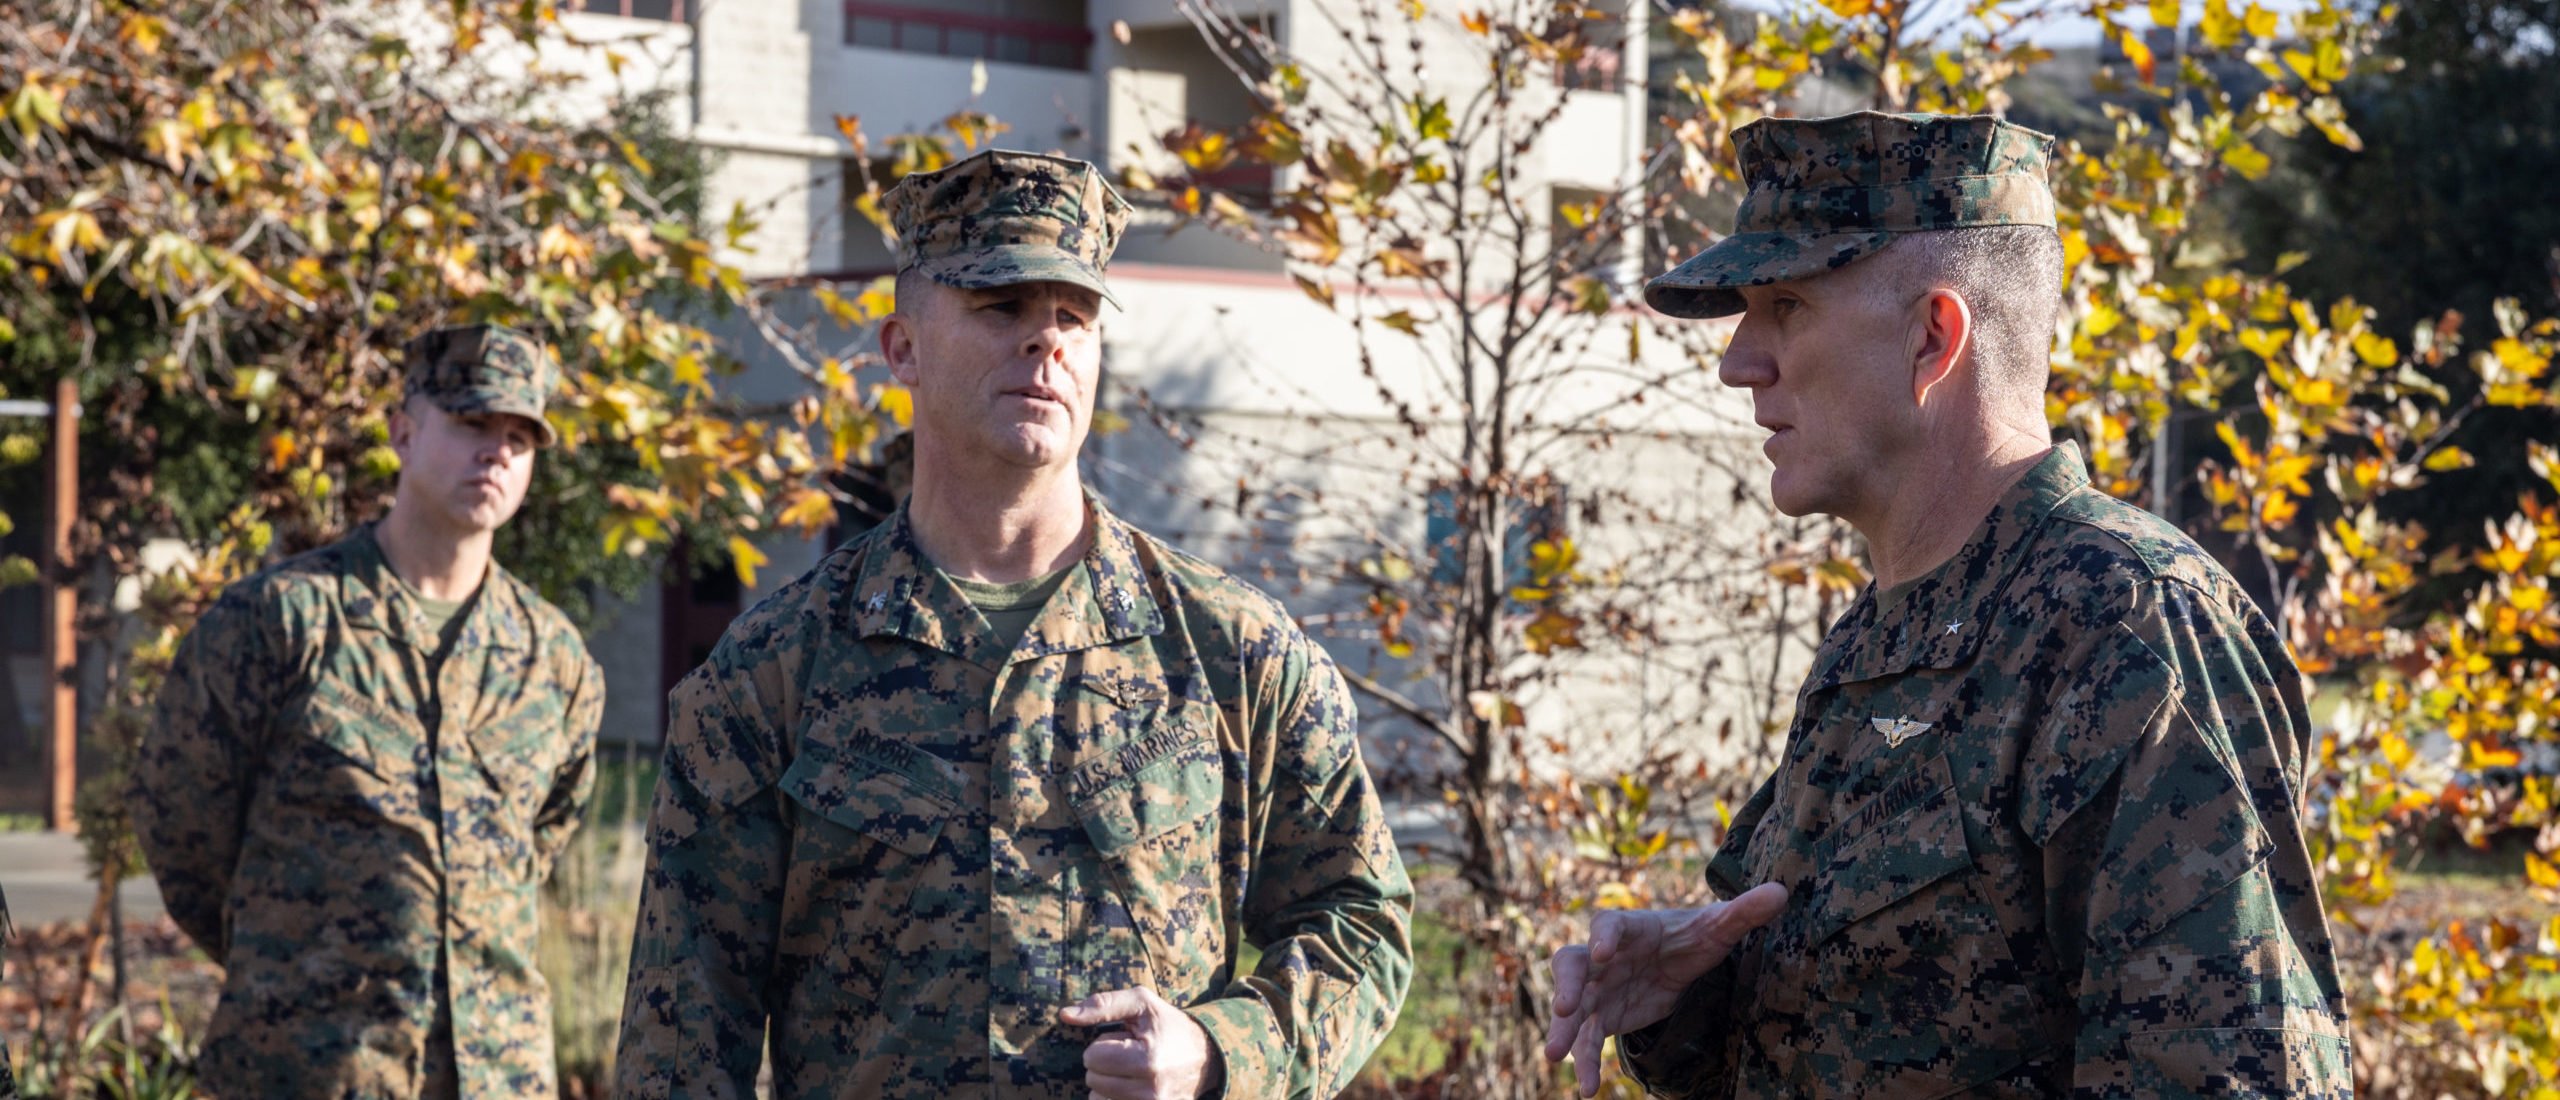 U.S. Marine Corps Brig. Gen. Jason Woodworth, right, the commanding general of Marine Corps Installations West, Marine Corps Base Camp Pendleton, speaks with Col. David Moore, the commanding officer of Marine Corps Air Station Camp Pendleton during a walkthrough of the 24 Area Bachelor Enlisted Quarters at MCB Camp Pendleton, California, Feb. 9, 2024. MCB Camp Pendleton is committed to monitoring and enhancing the standard of living for Marines residing in BEQs to ensure clean and secure living spaces.